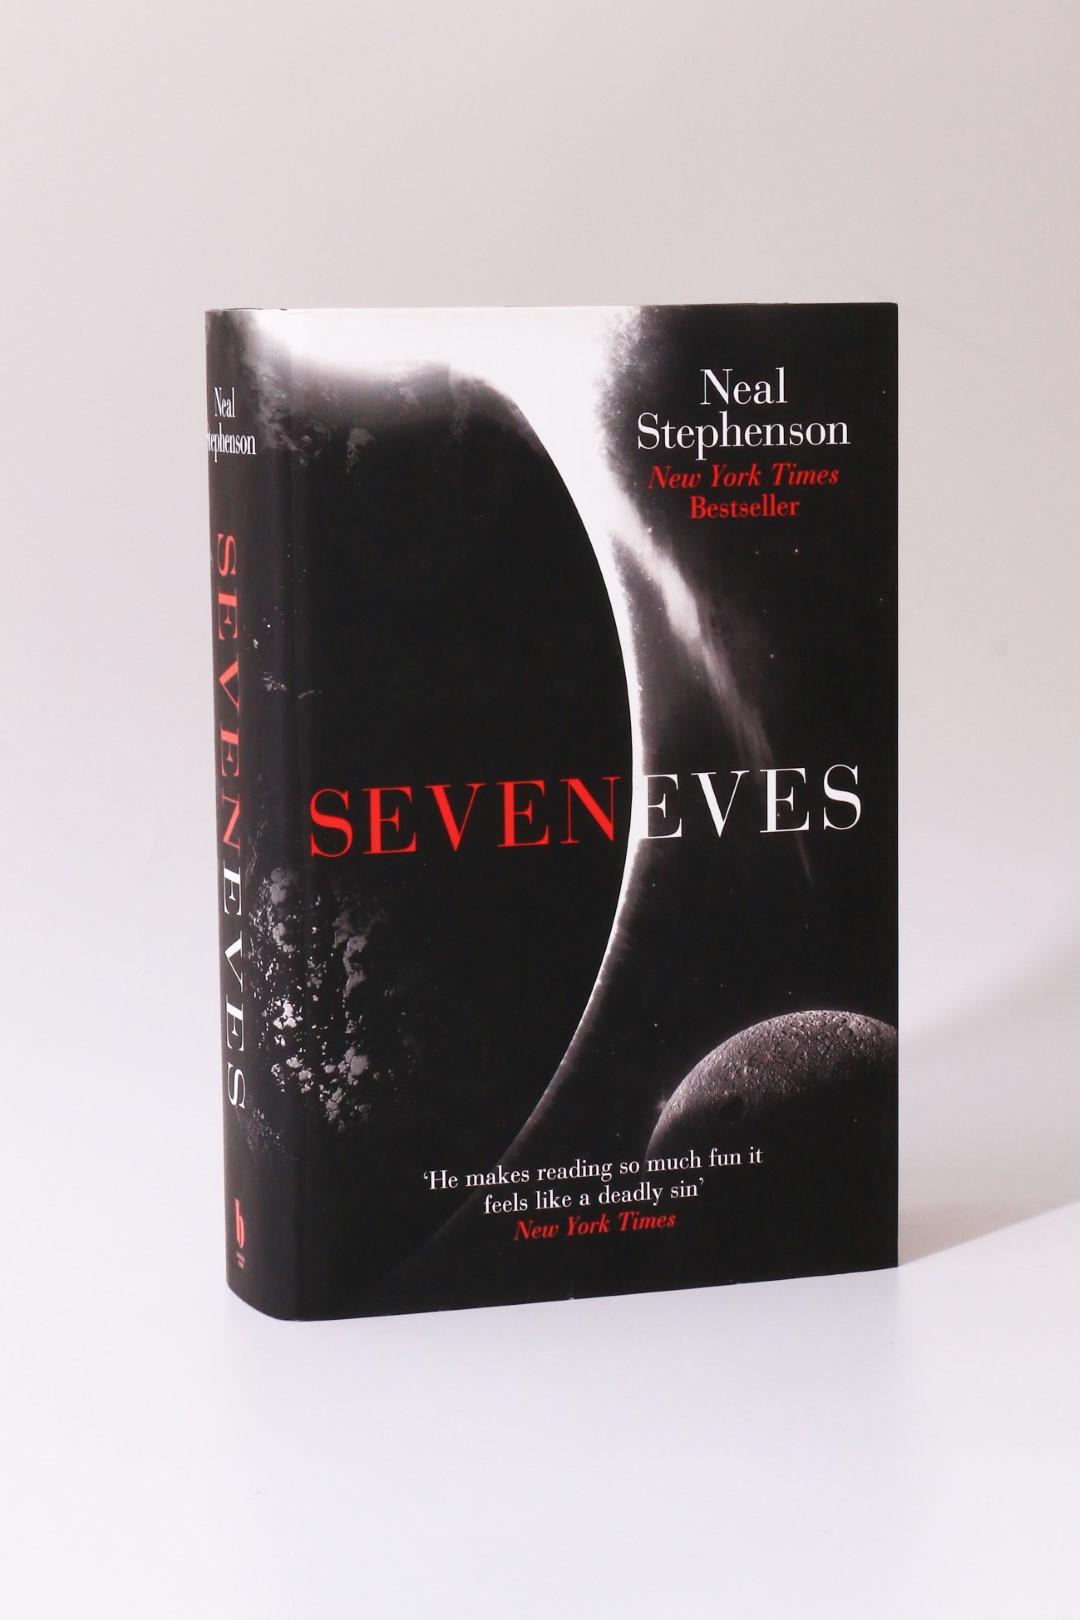 Neal Stephenson - Seveneves - Borough Press, 2015, Signed First Edition.